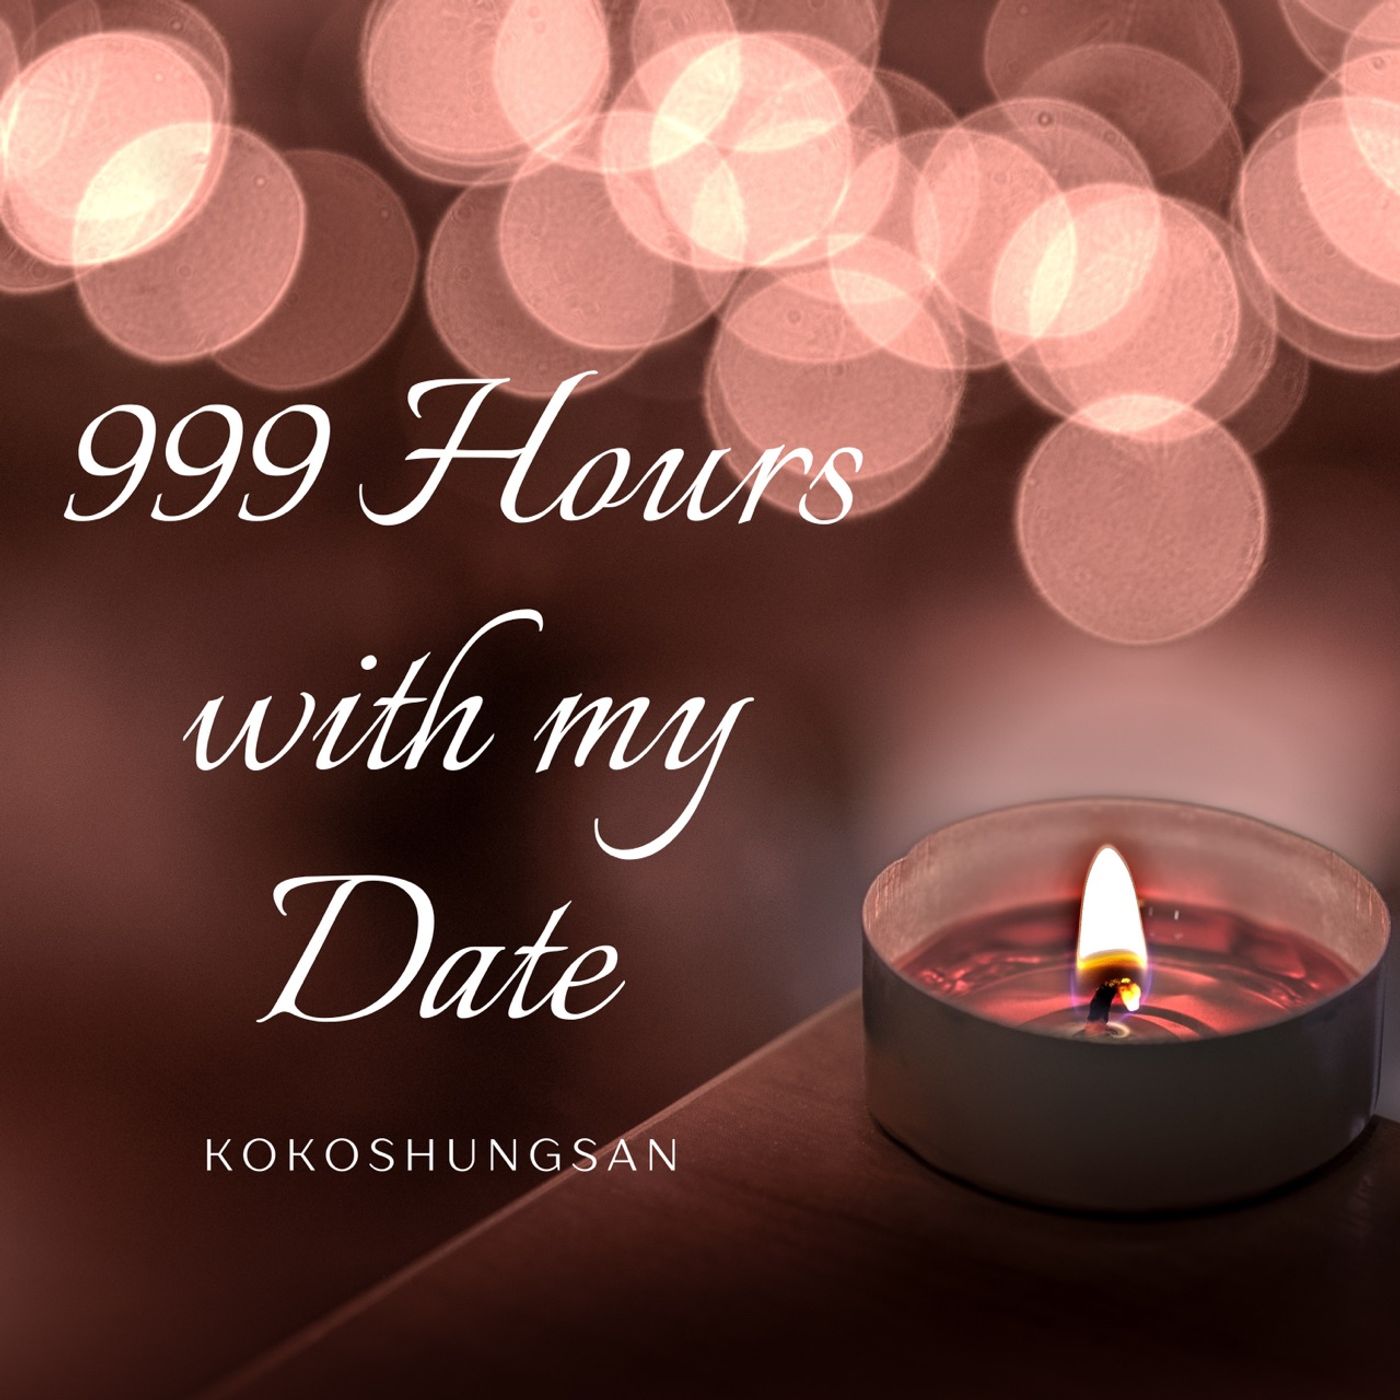 999 Hours with my Date